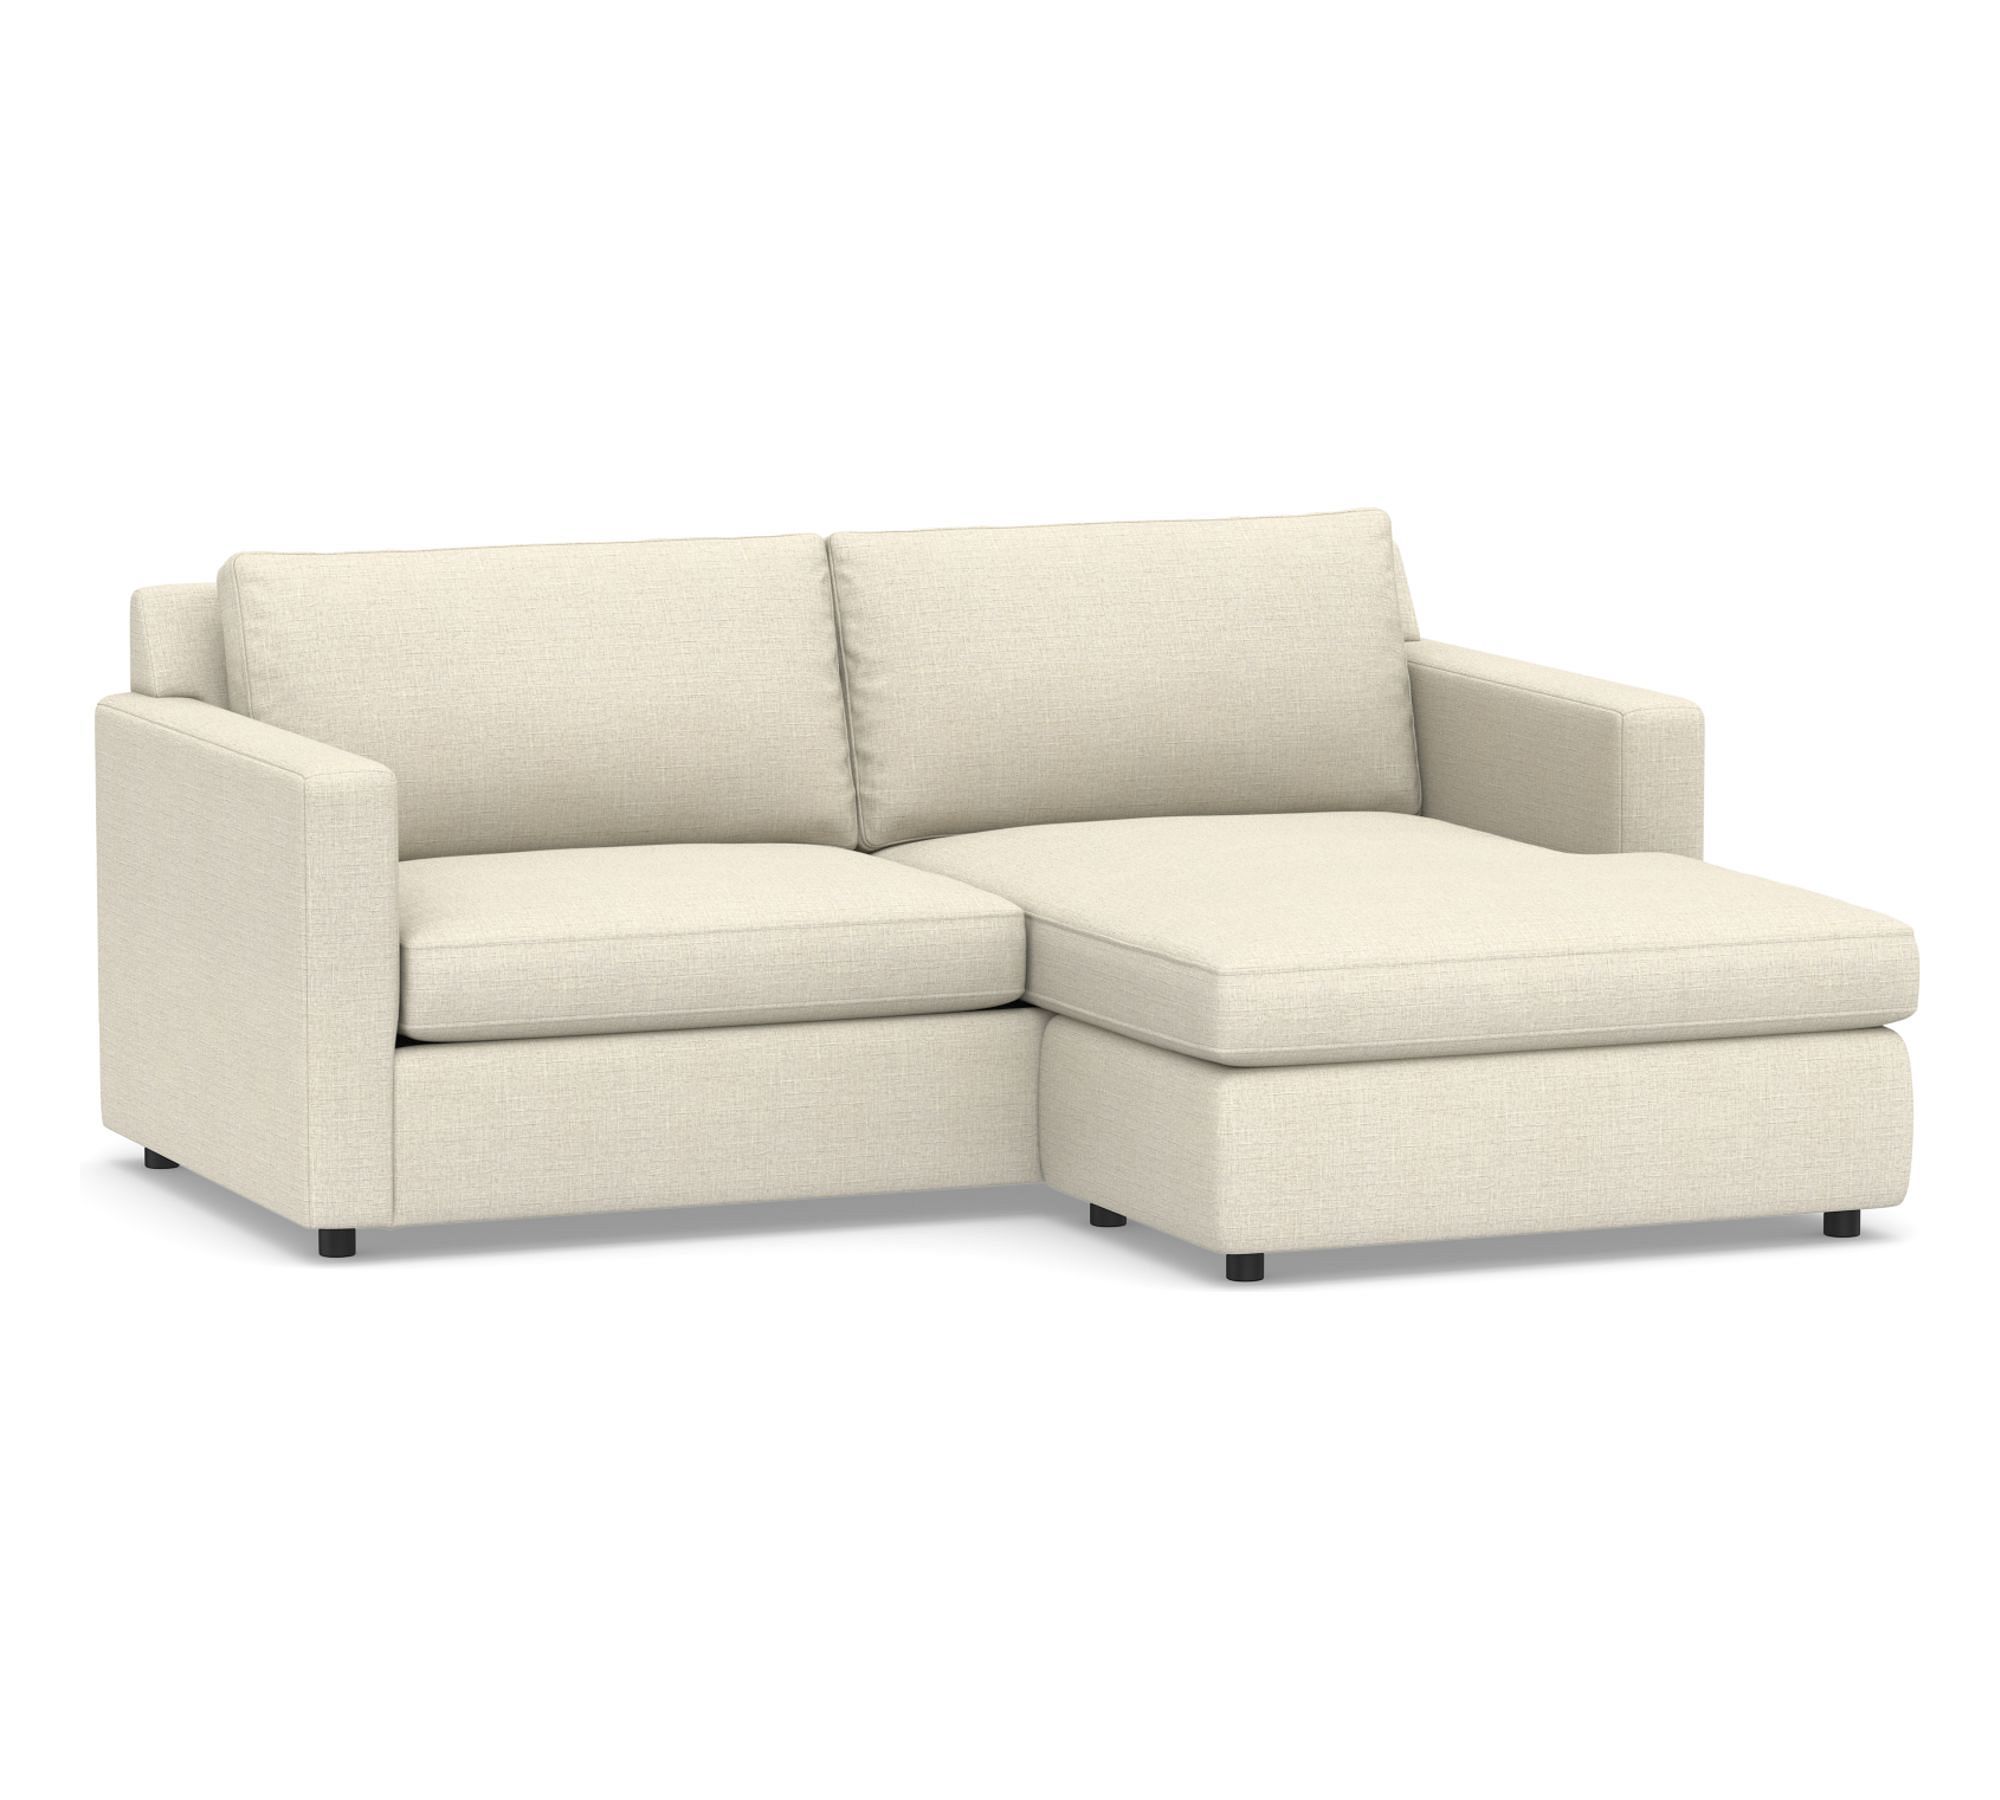 Sanford Square Reversible Sleeper Chaise Sectional - Storage Available (79")